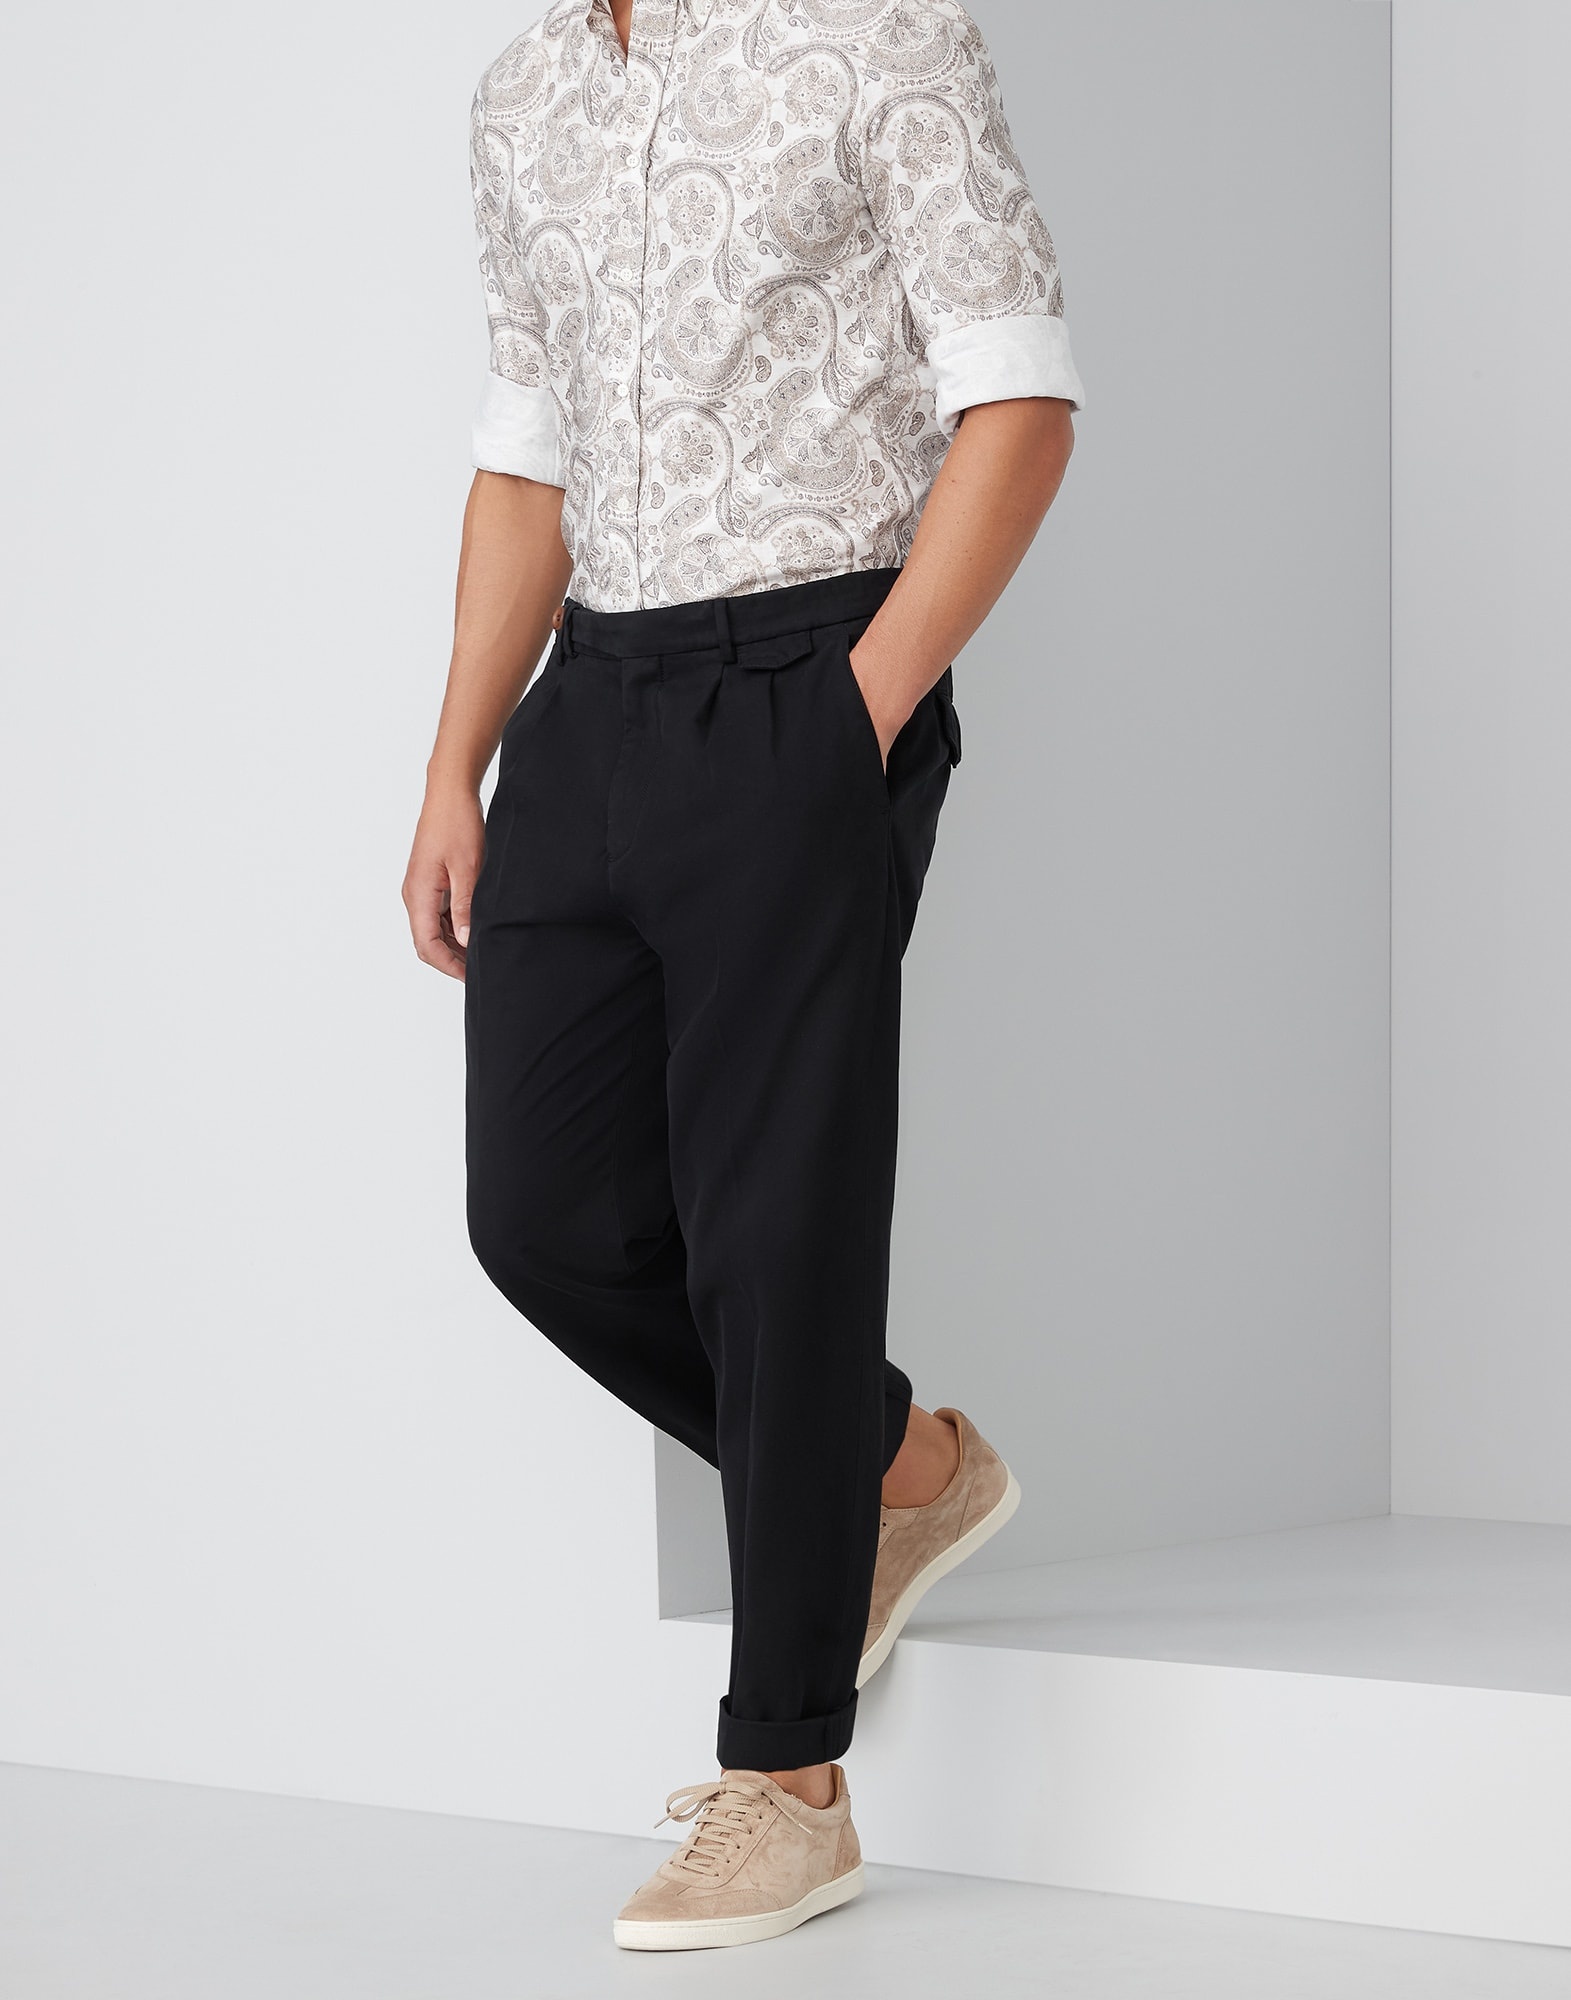 Garment-dyed leisure fit trousers in twisted cotton gabardine with double pleats and tabbed waistban - 1